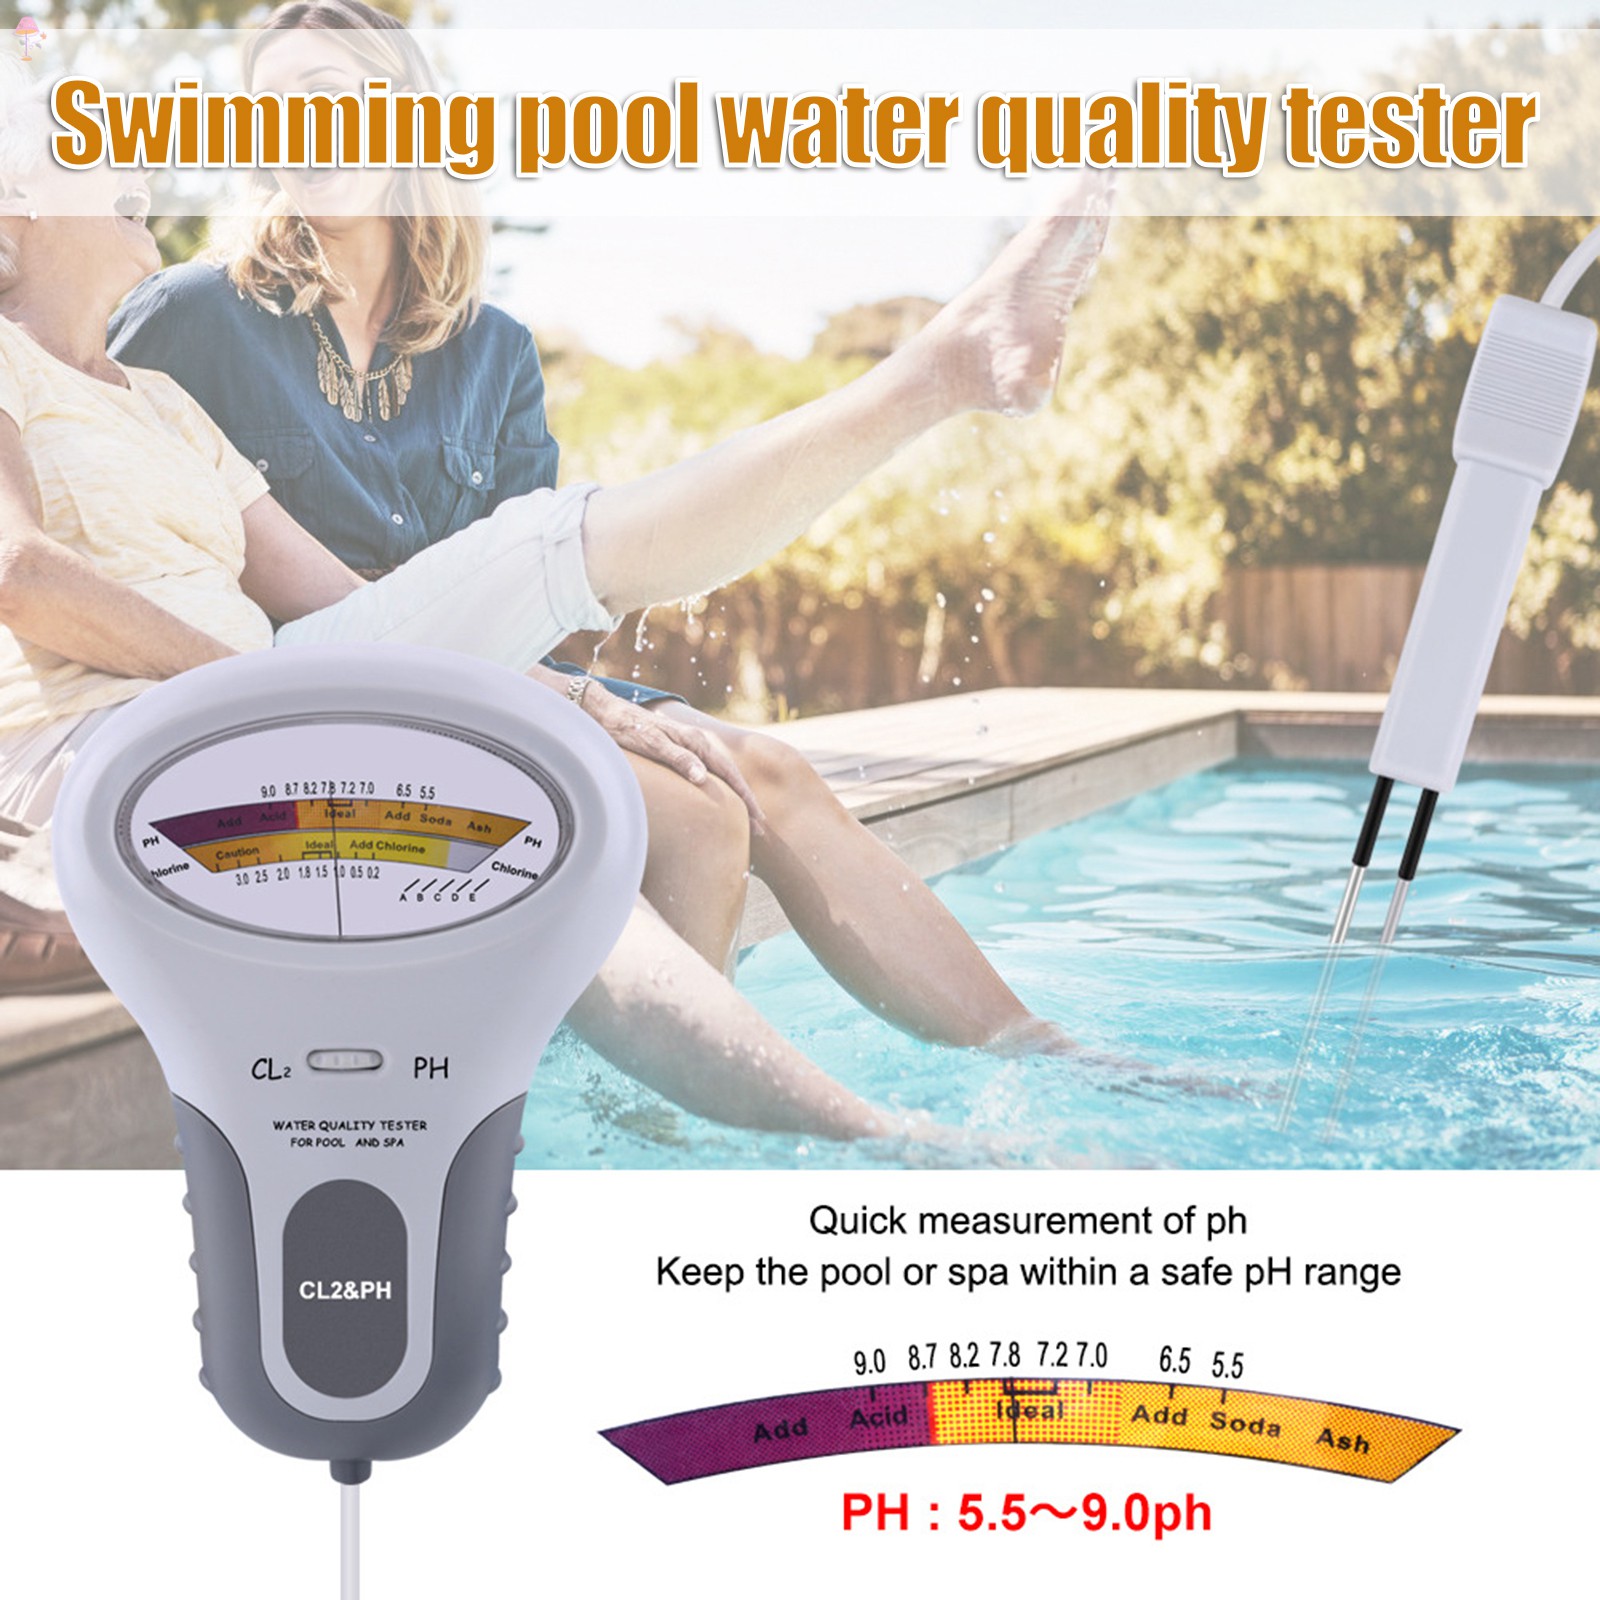 LL PH Meter & Chlorine Level CL2 Meter Combo Portable 2 in 1 Water Quality Dial Tester for Pool Spa Drinking Water .VN